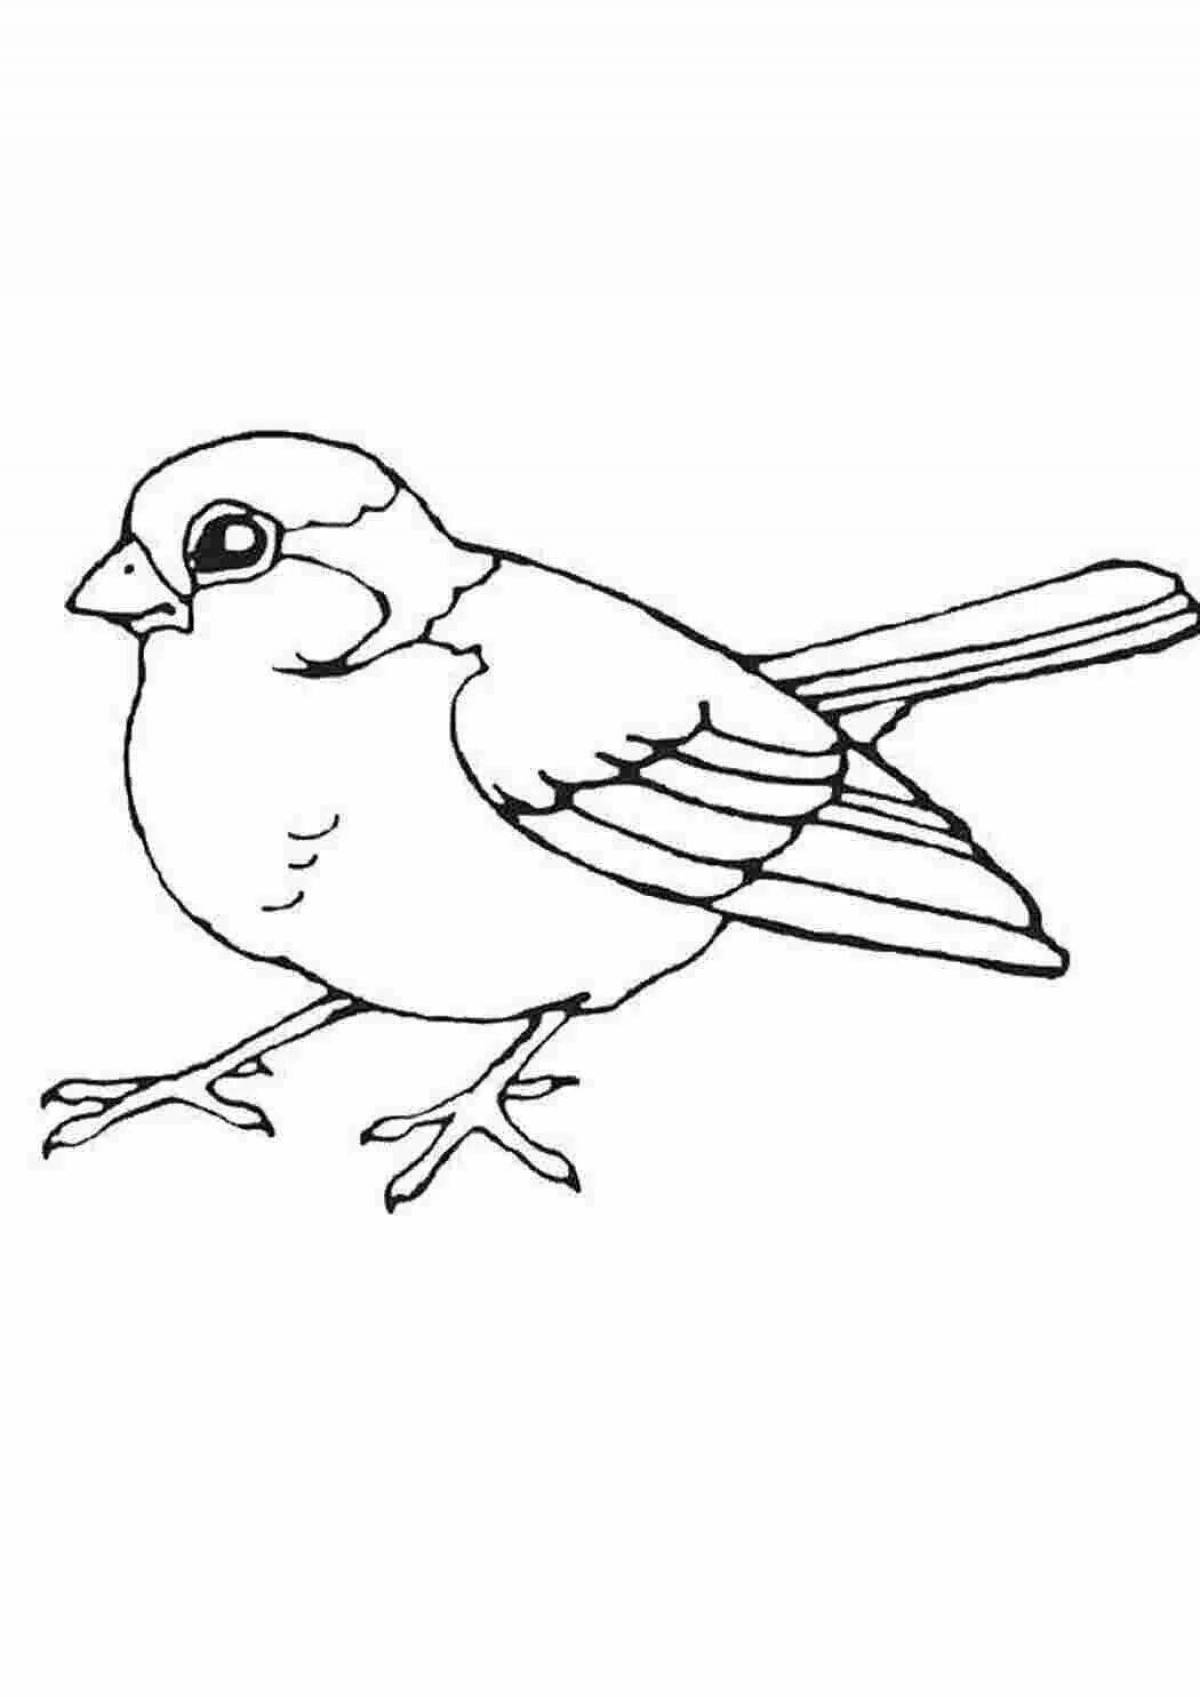 Colorful and delightful sparrow coloring book for children 2-3 years old